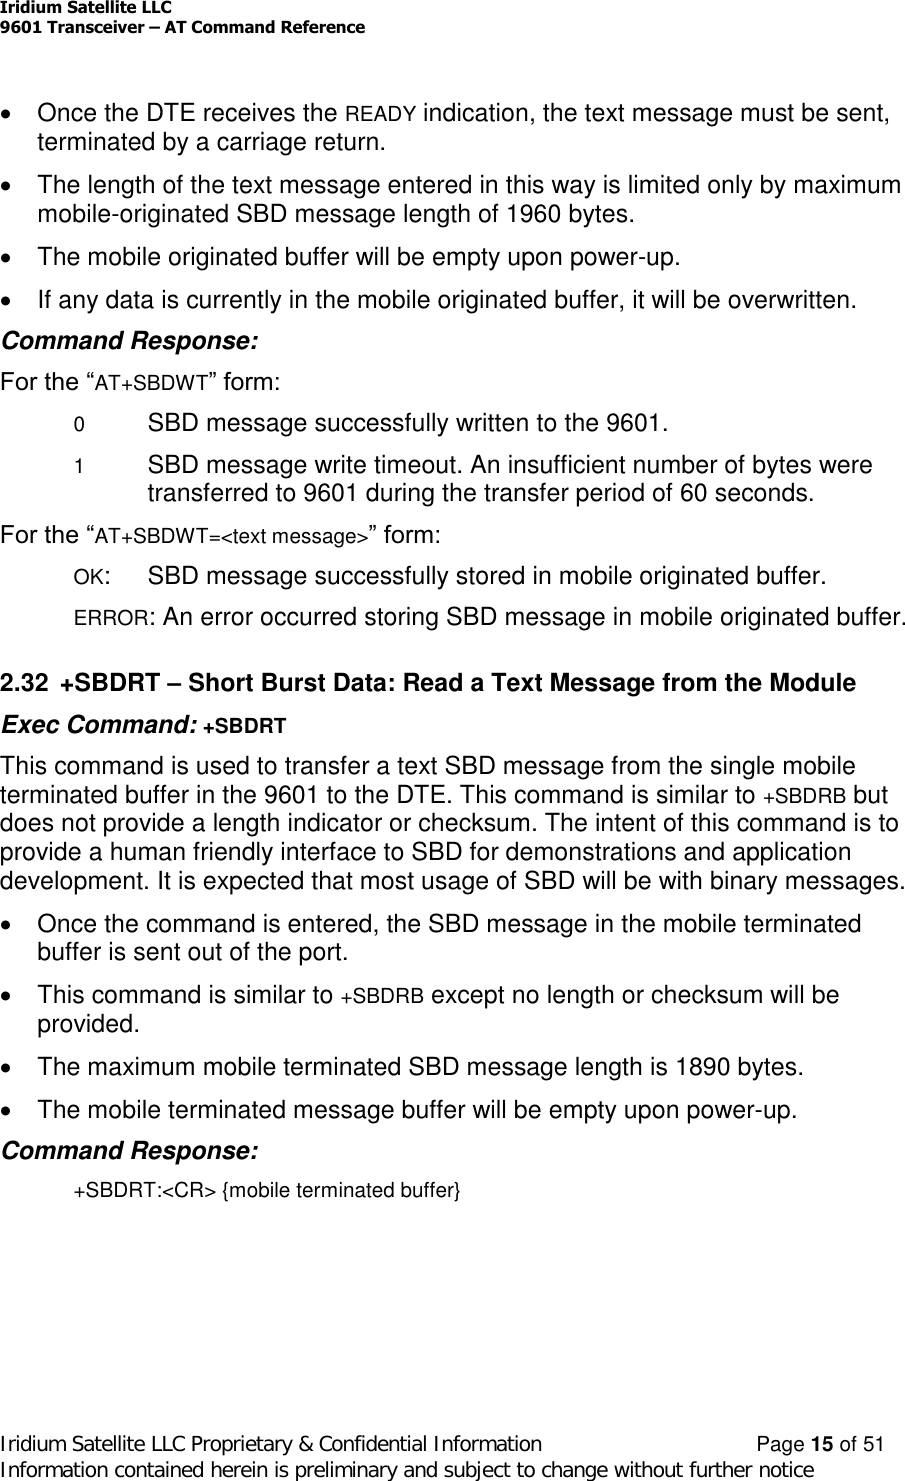 Iridium Satellite LLC9601 Transceiver –AT Command ReferenceIridium Satellite LLC Proprietary &amp; Confidential Information Page 15 of 51Information contained herein is preliminary and subject to change without further noticeOnce the DTE receives the READY indication, the text message must be sent,terminated by a carriage return.The length of the text message entered in this way is limited only by maximummobile-originated SBD message length of 1960 bytes.The mobile originated buffer will be empty upon power-up.If any data is currently in the mobile originated buffer, it will be overwritten.Command Response:For the “AT+SBDWT” form:0SBD message successfully written to the 9601.1SBD message write timeout. An insufficient number of bytes weretransferred to 9601 during the transfer period of 60 seconds.For the “AT+SBDWT=&lt;text message&gt;” form:OK: SBD message successfully stored in mobile originated buffer.ERROR: An error occurred storing SBD message in mobile originated buffer.2.32 +SBDRT –Short Burst Data: Read a Text Message from the ModuleExec Command: +SBDRTThis command is used to transfer a text SBD message from the single mobileterminated buffer in the 9601 to the DTE. This command is similar to +SBDRB butdoes not provide a length indicator or checksum. The intent of this command is toprovide a human friendly interface to SBD for demonstrations and applicationdevelopment. It is expected that most usage of SBD will be with binary messages.Once the command is entered, the SBD message in the mobile terminatedbuffer is sent out of the port.This command is similar to +SBDRB except no length or checksum will beprovided.The maximum mobile terminated SBD message length is 1890 bytes.The mobile terminated message buffer will be empty upon power-up.Command Response:+SBDRT:&lt;CR&gt; {mobile terminated buffer}